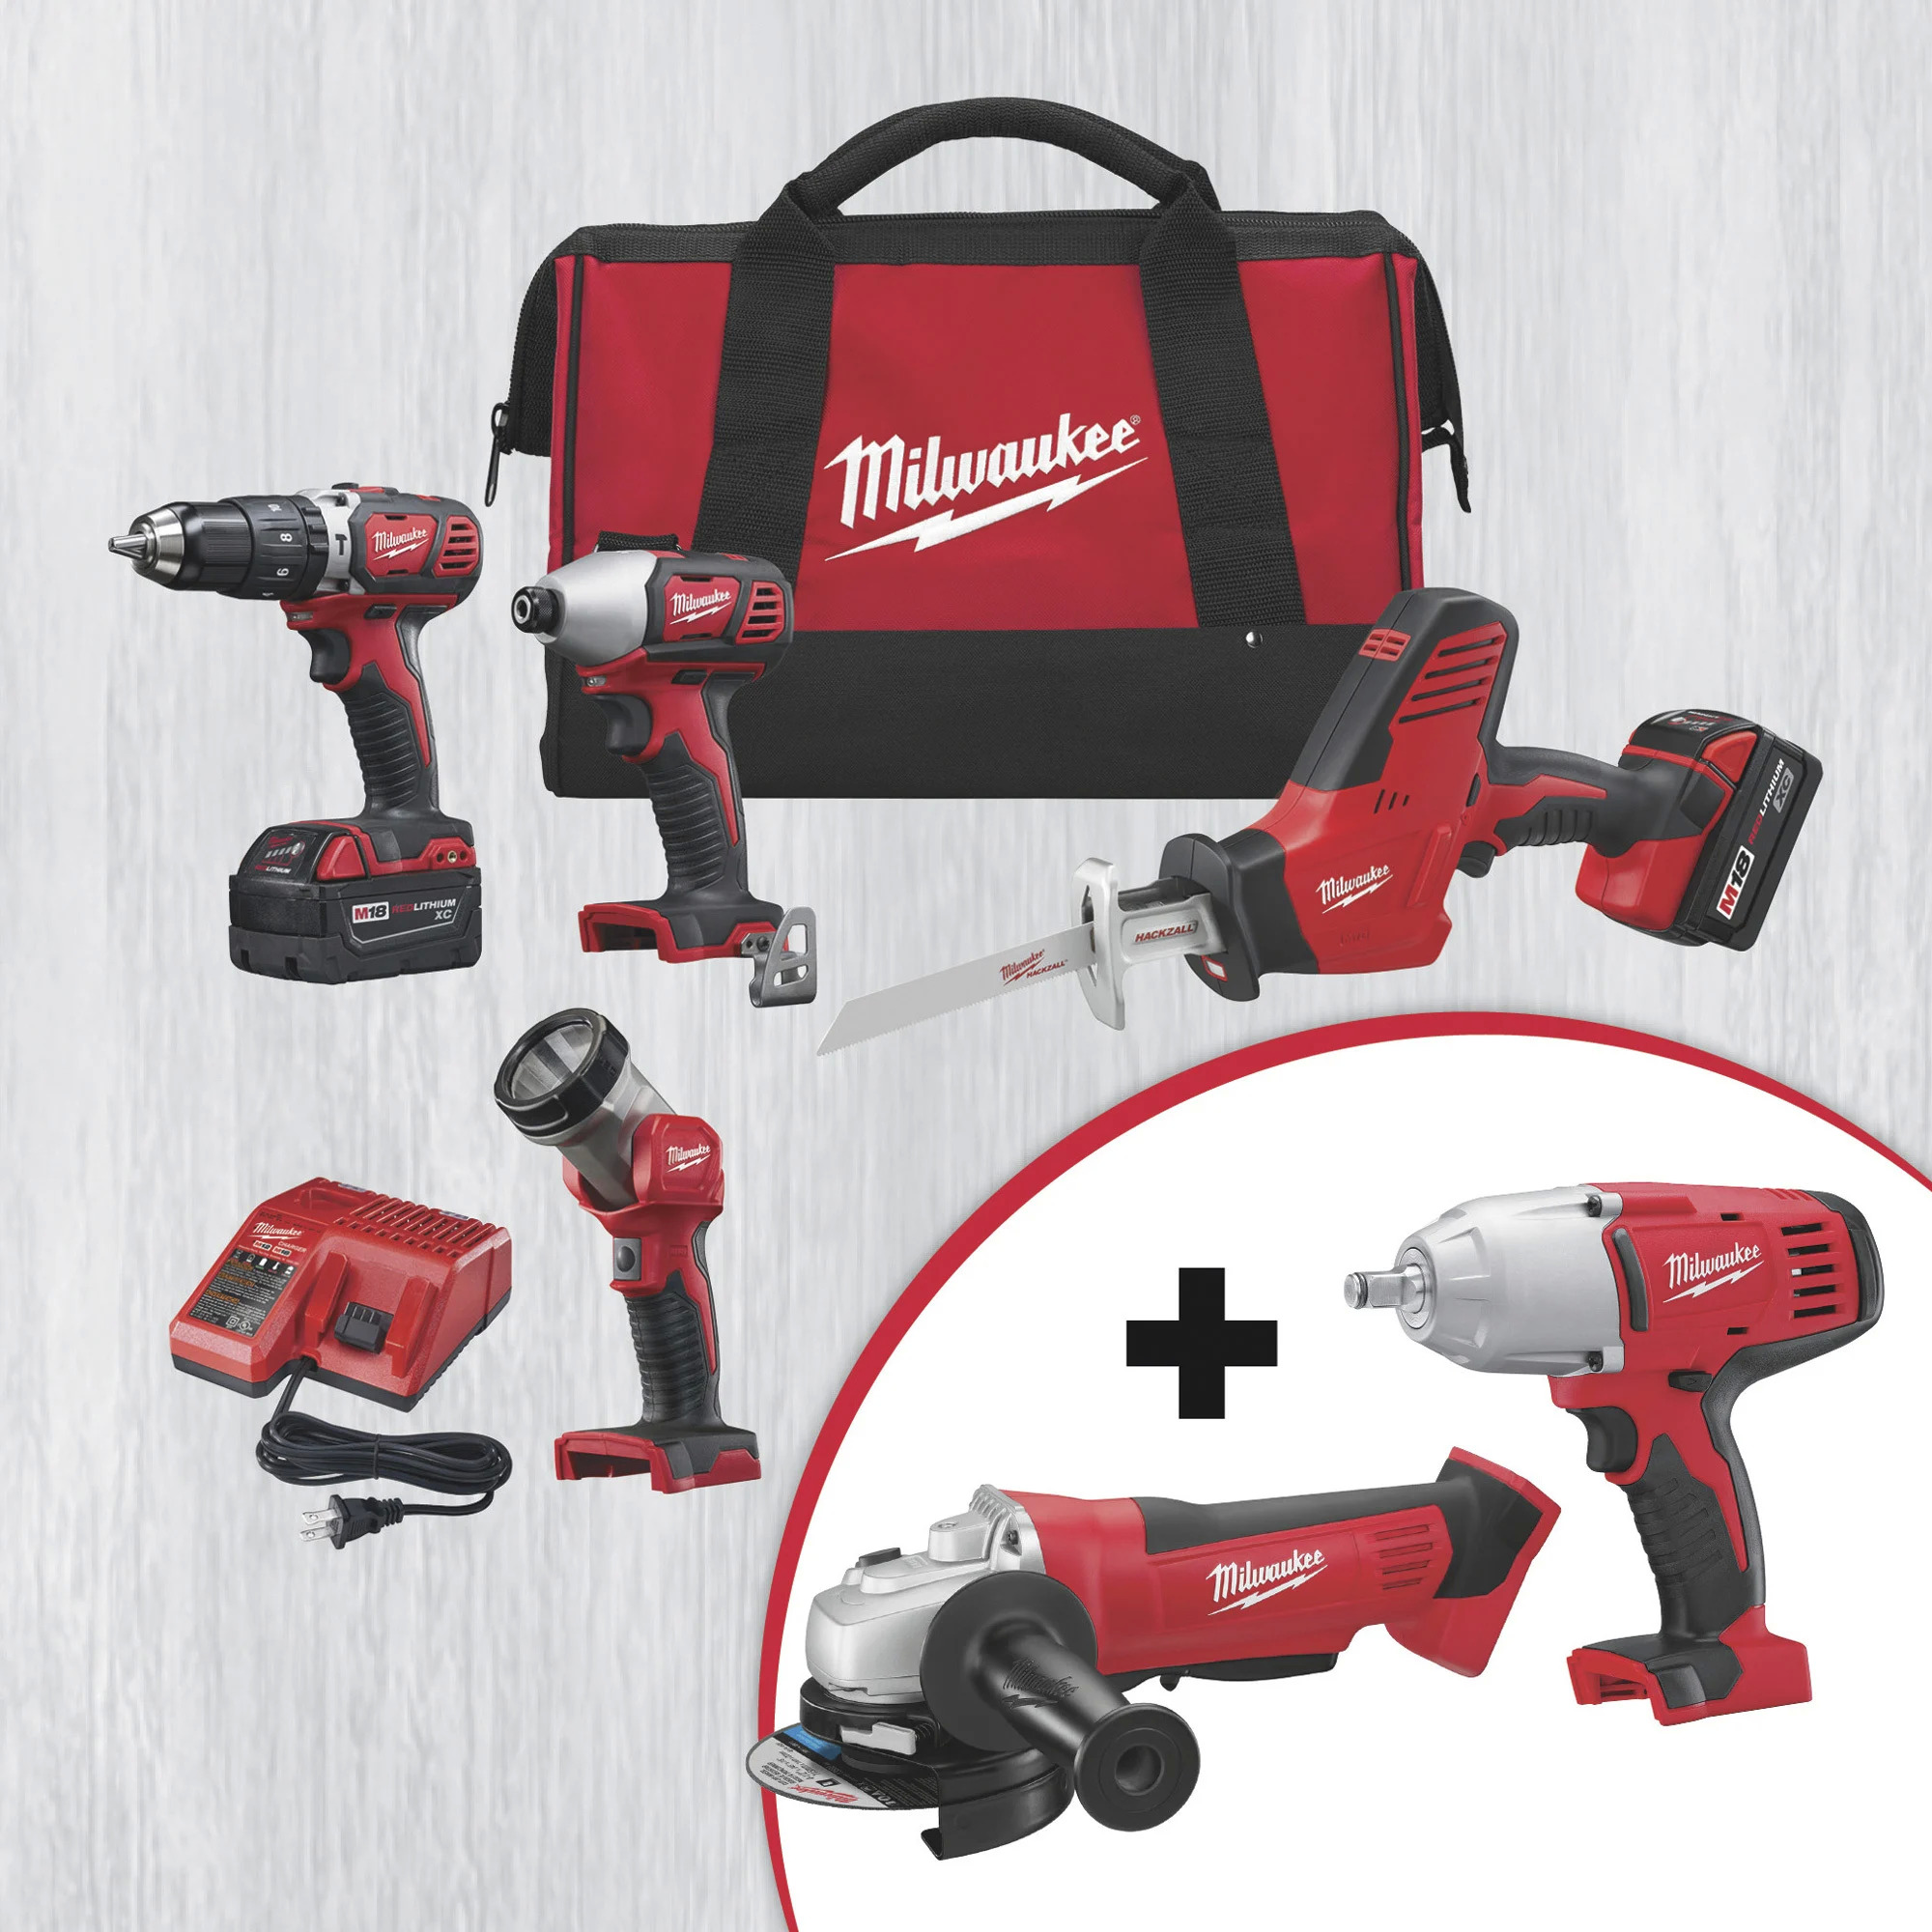 Milwaukee M18 Cordless 4-Tool Combo Set with FREE M18 1/2in. High-Torque Impact Wrench and M18 4.5in. Cutoff/Grinder!  $419